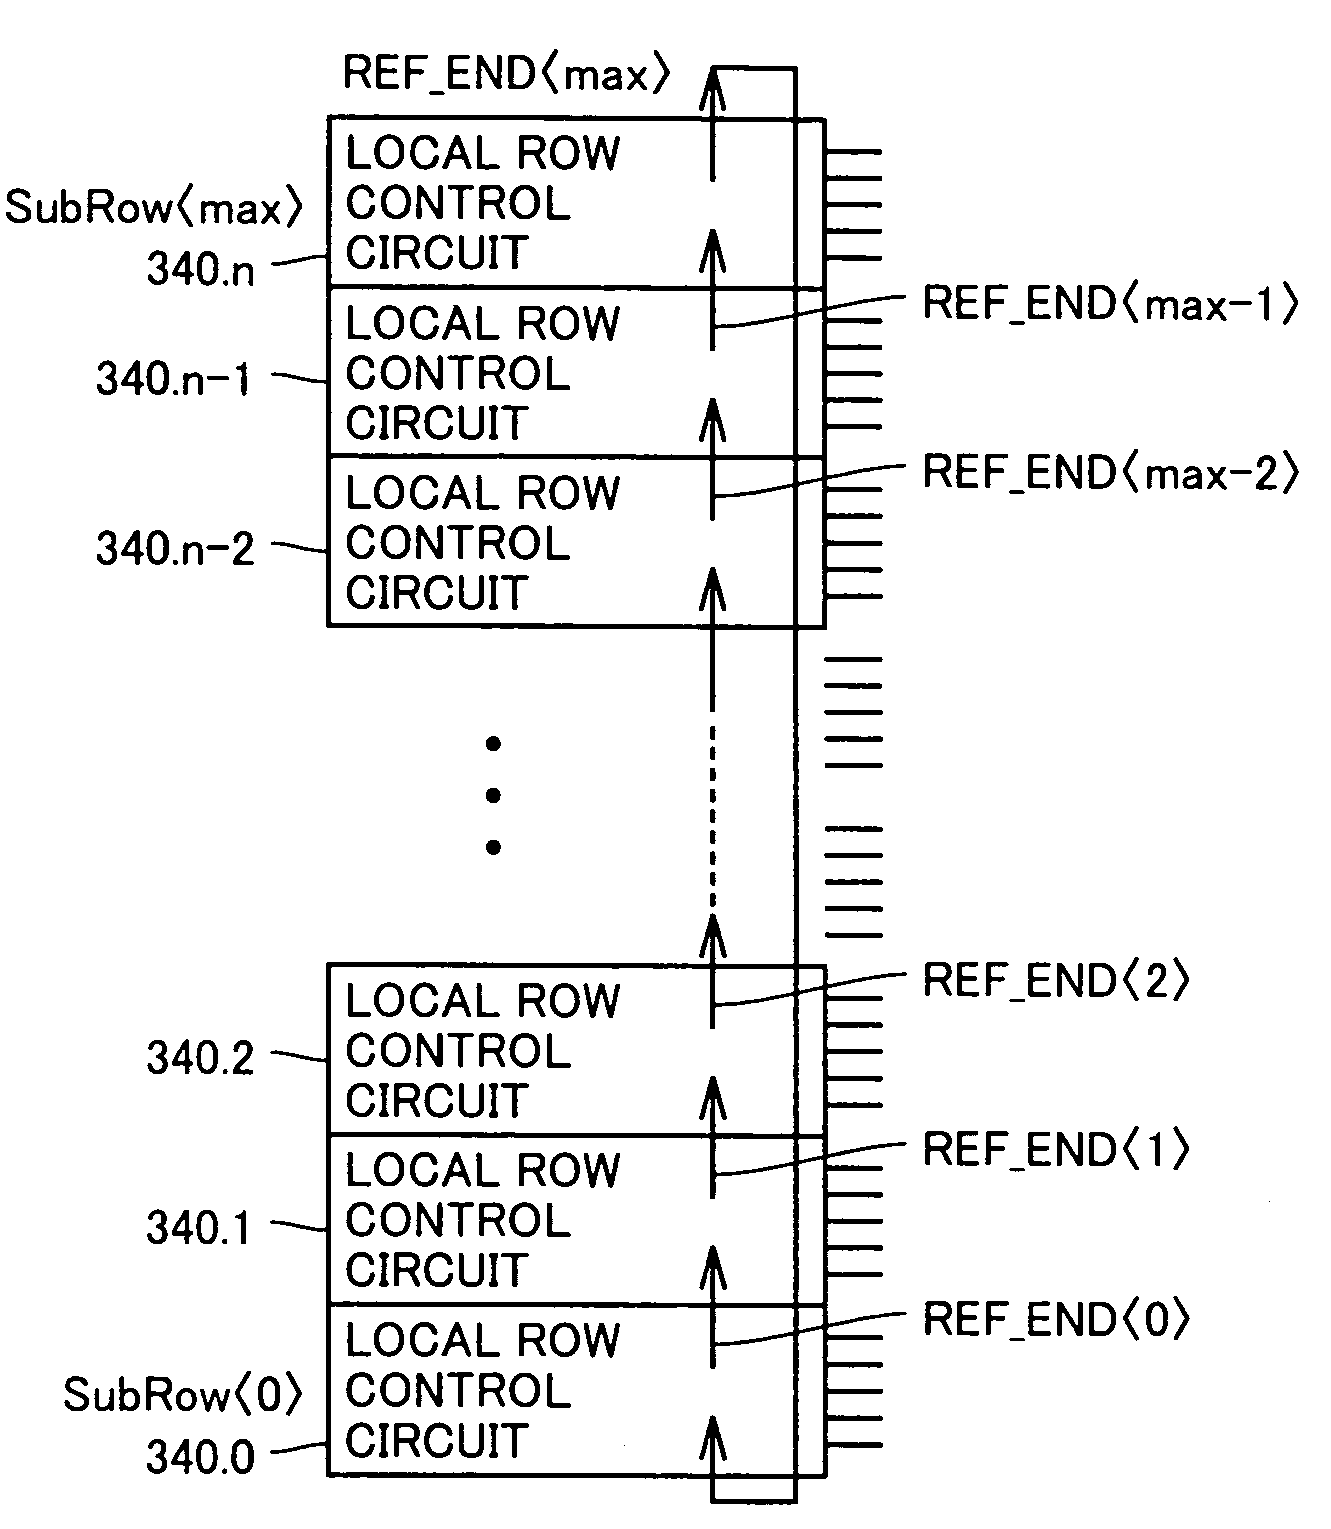 Semiconductor memory device having easily redesigned memory capacity